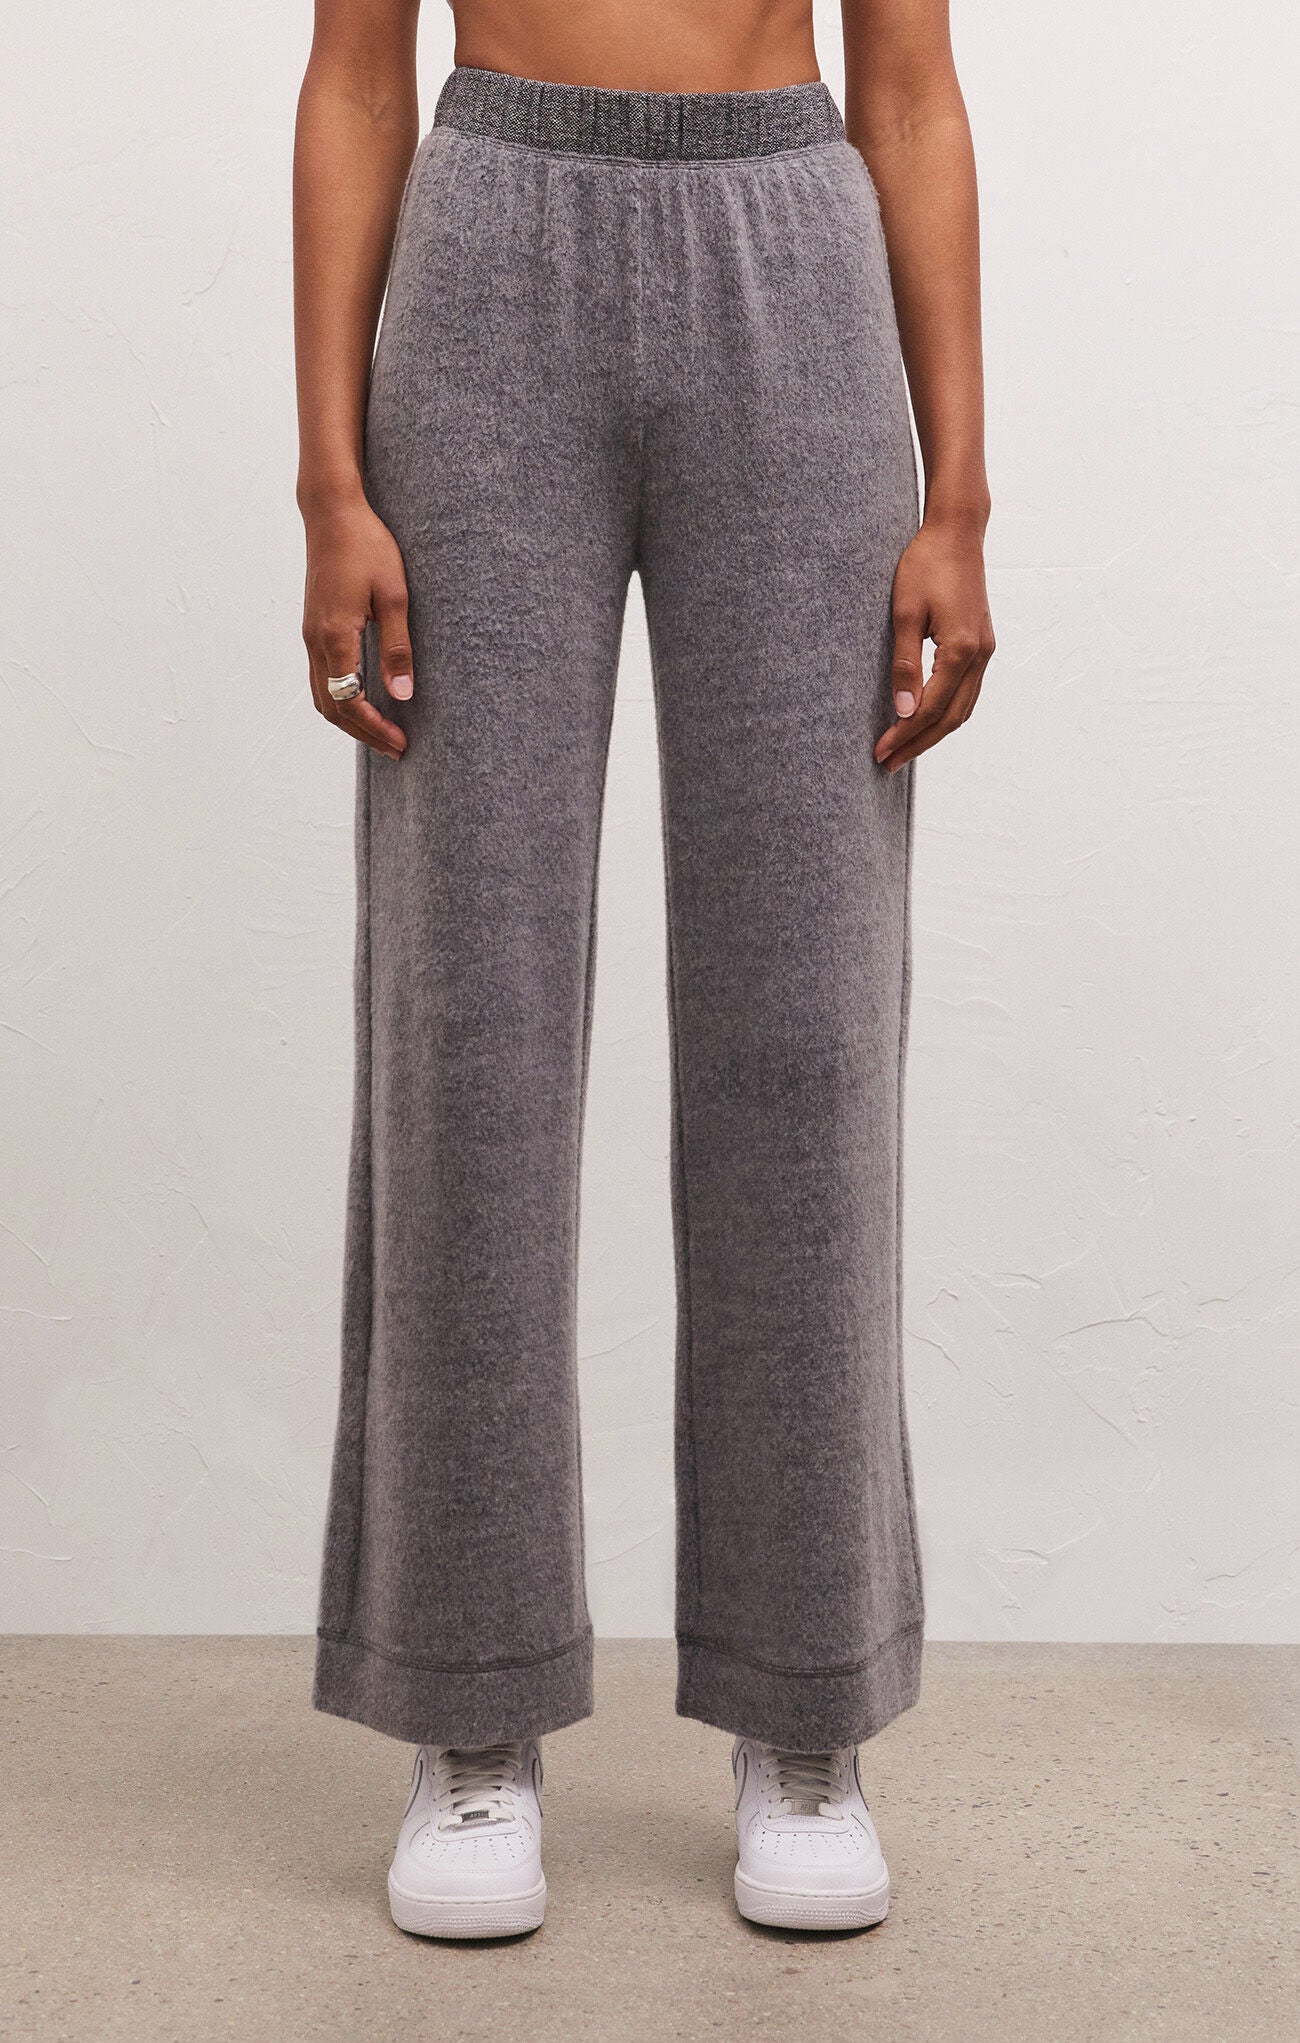 Z SUPPLY TESSA COZY PANT IN CHARCOAL HEATHER